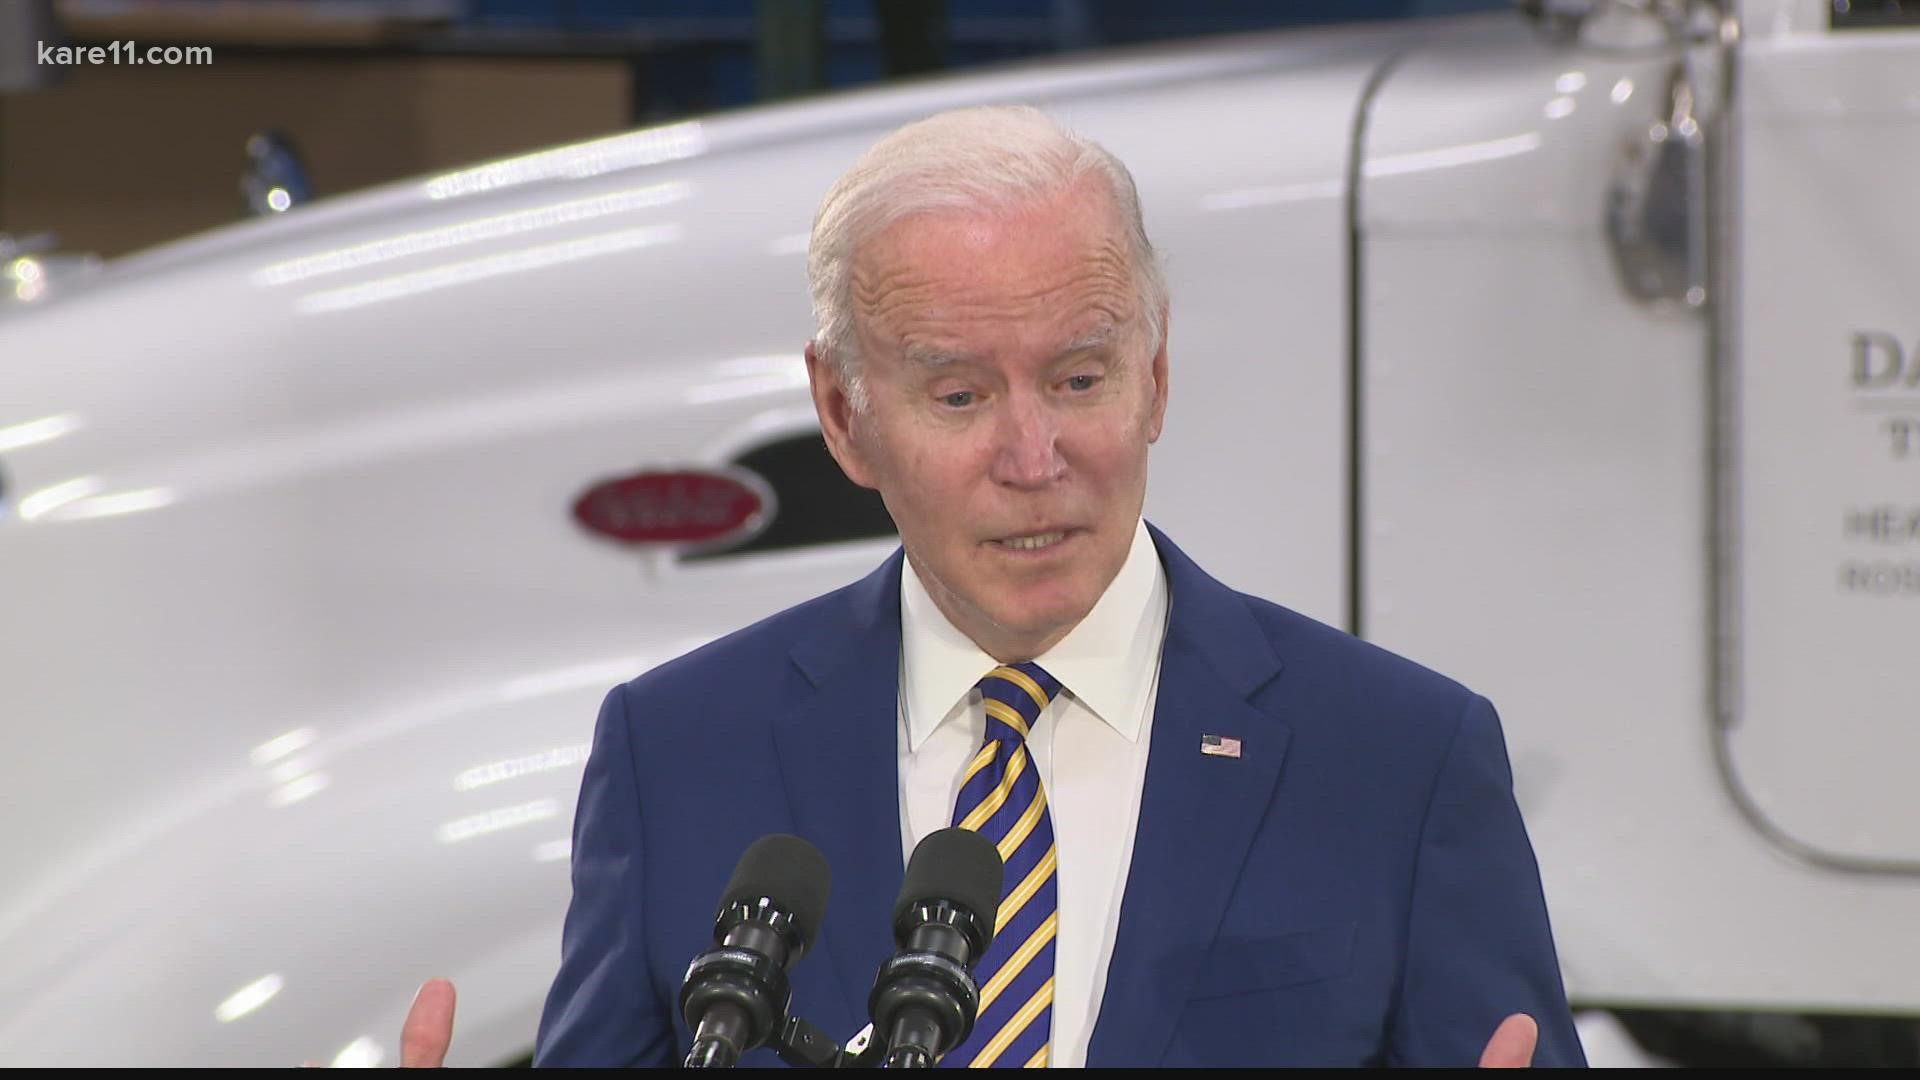 Biden went to Dakota County Technical College in Rosemount to deliver remarks about the massive bipartisan infrastructure package he just signed.